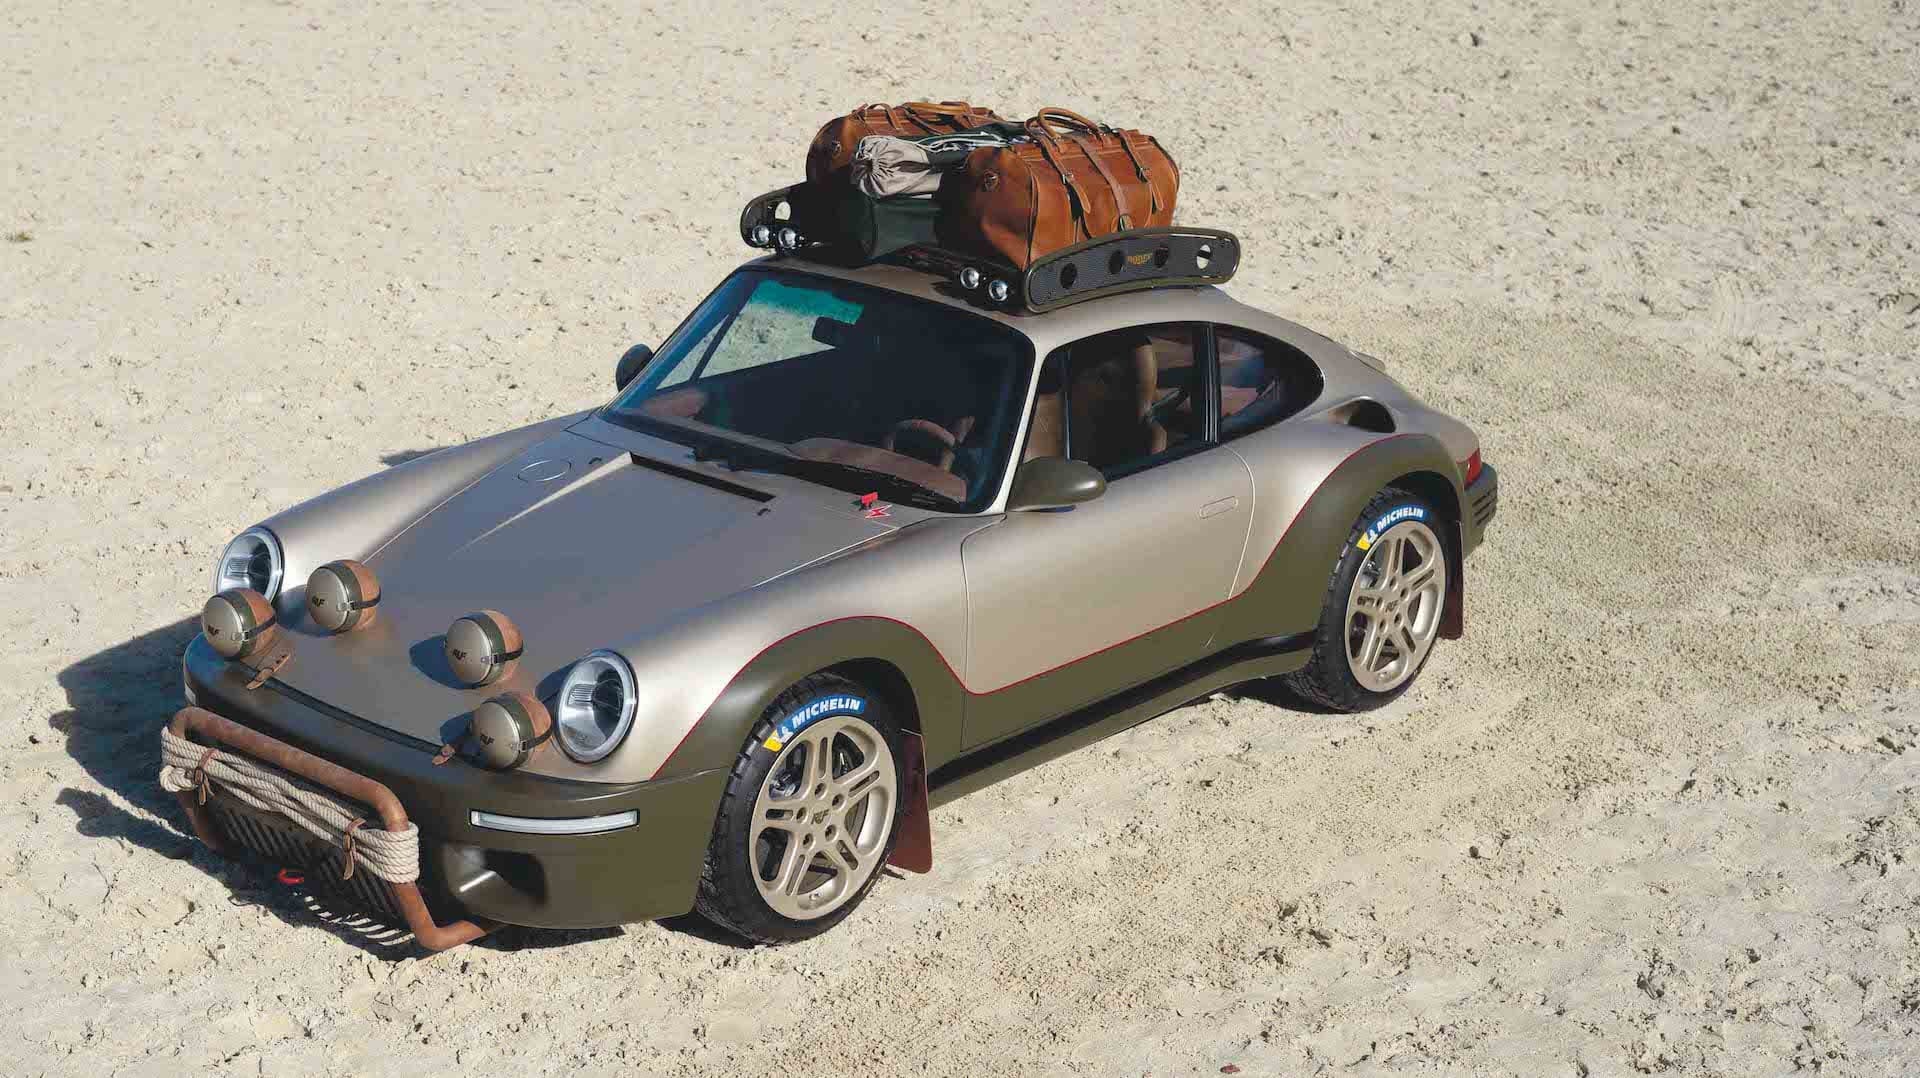 RUF Rodeo Is a 500-HP, Porsche-Based Off-Roader for Sophisticated Cowboys